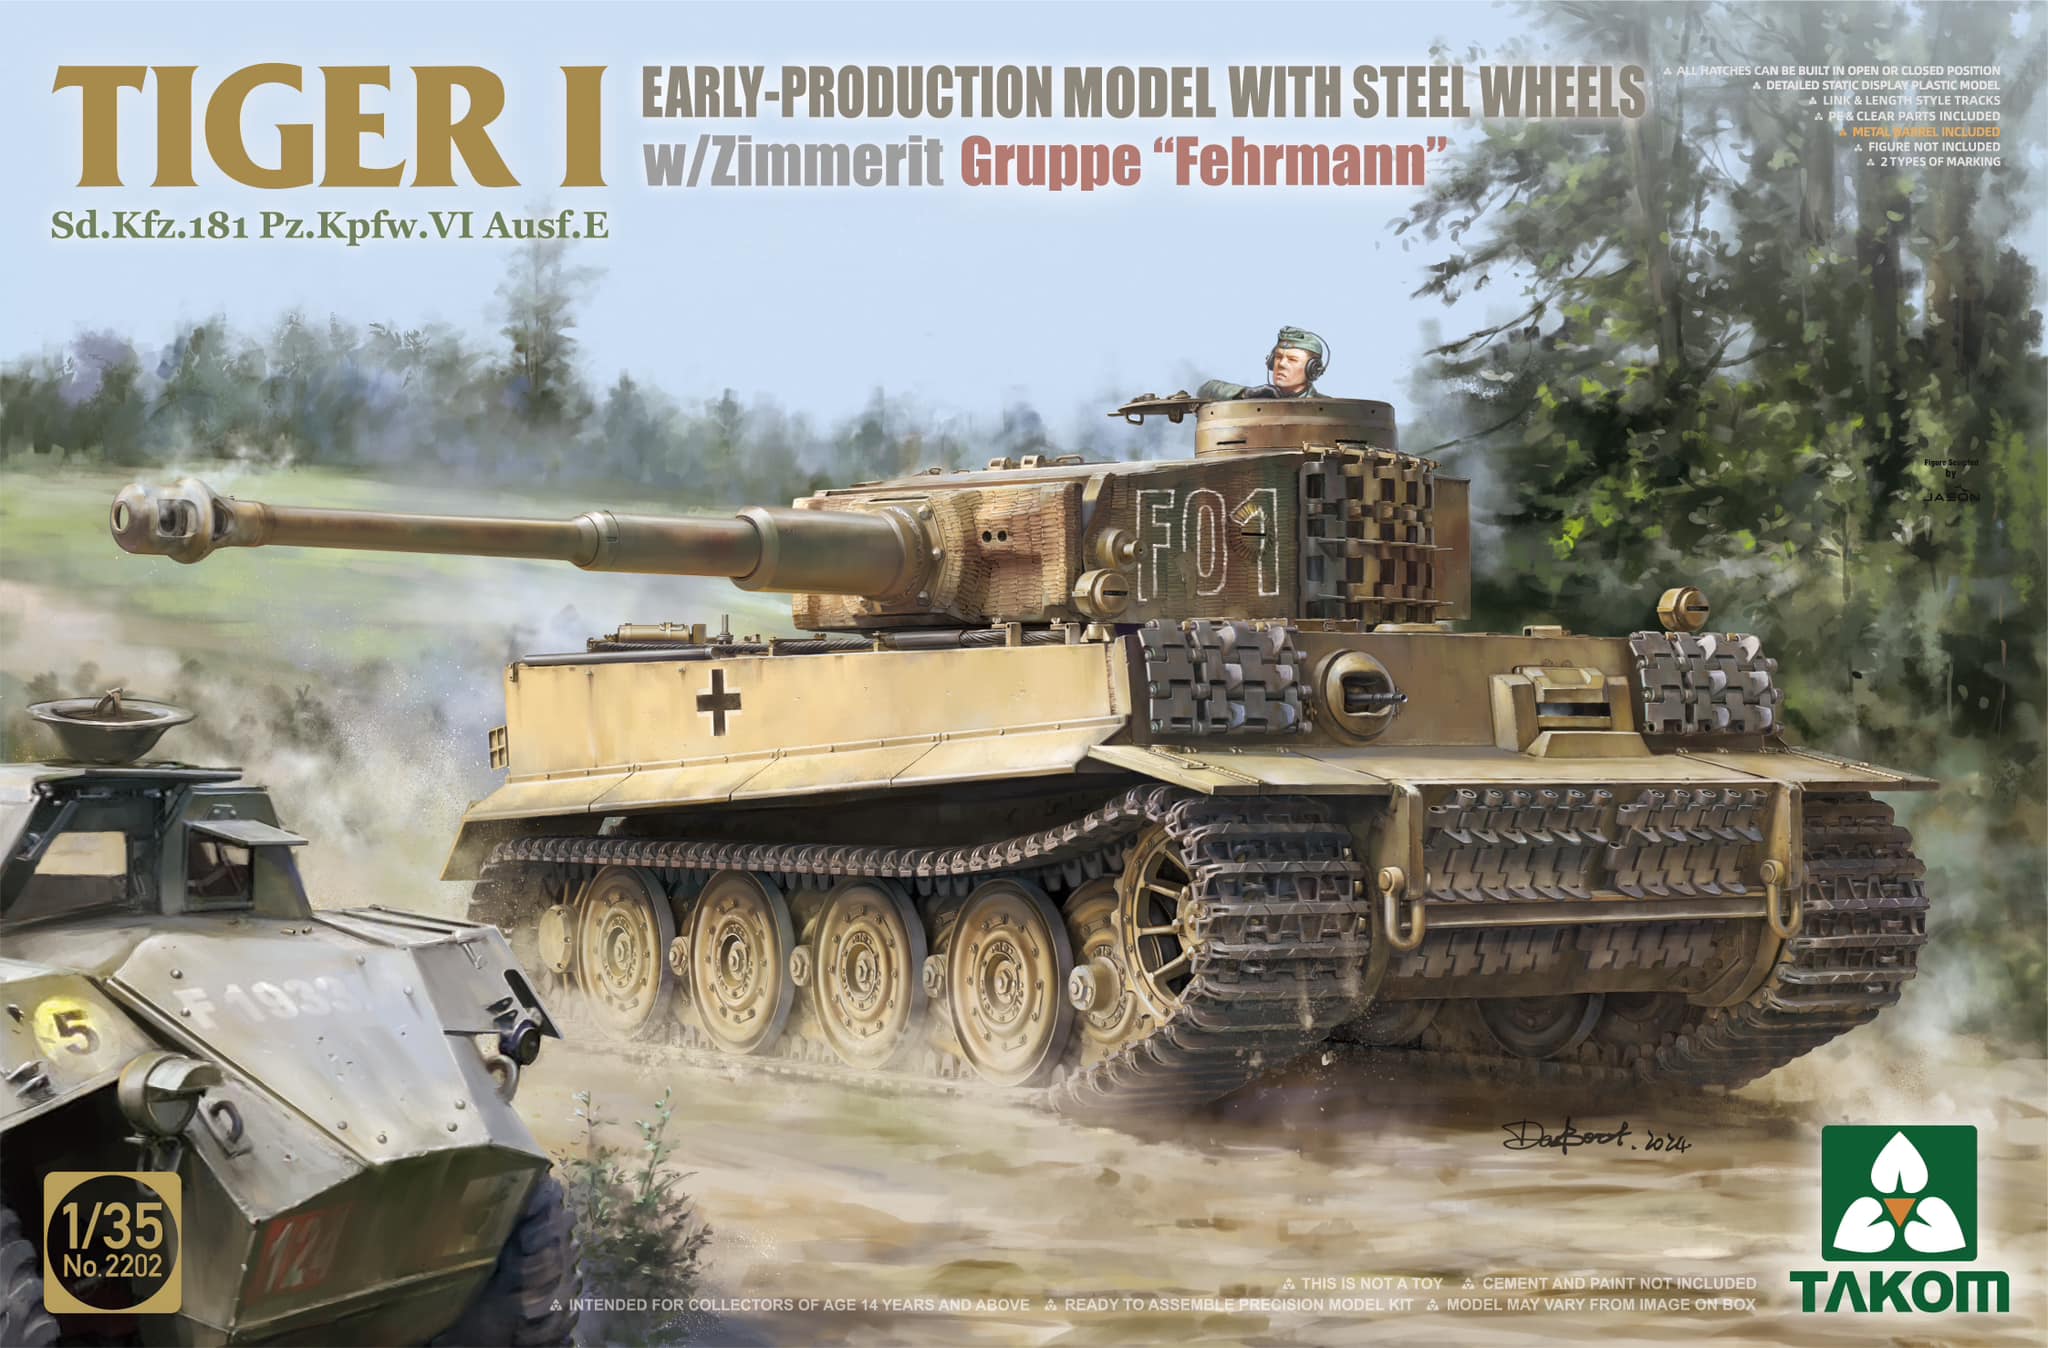 Tiger I - Early-Production With Steel Wheels w/Zimmerit - "Gruppe Fehrmann"